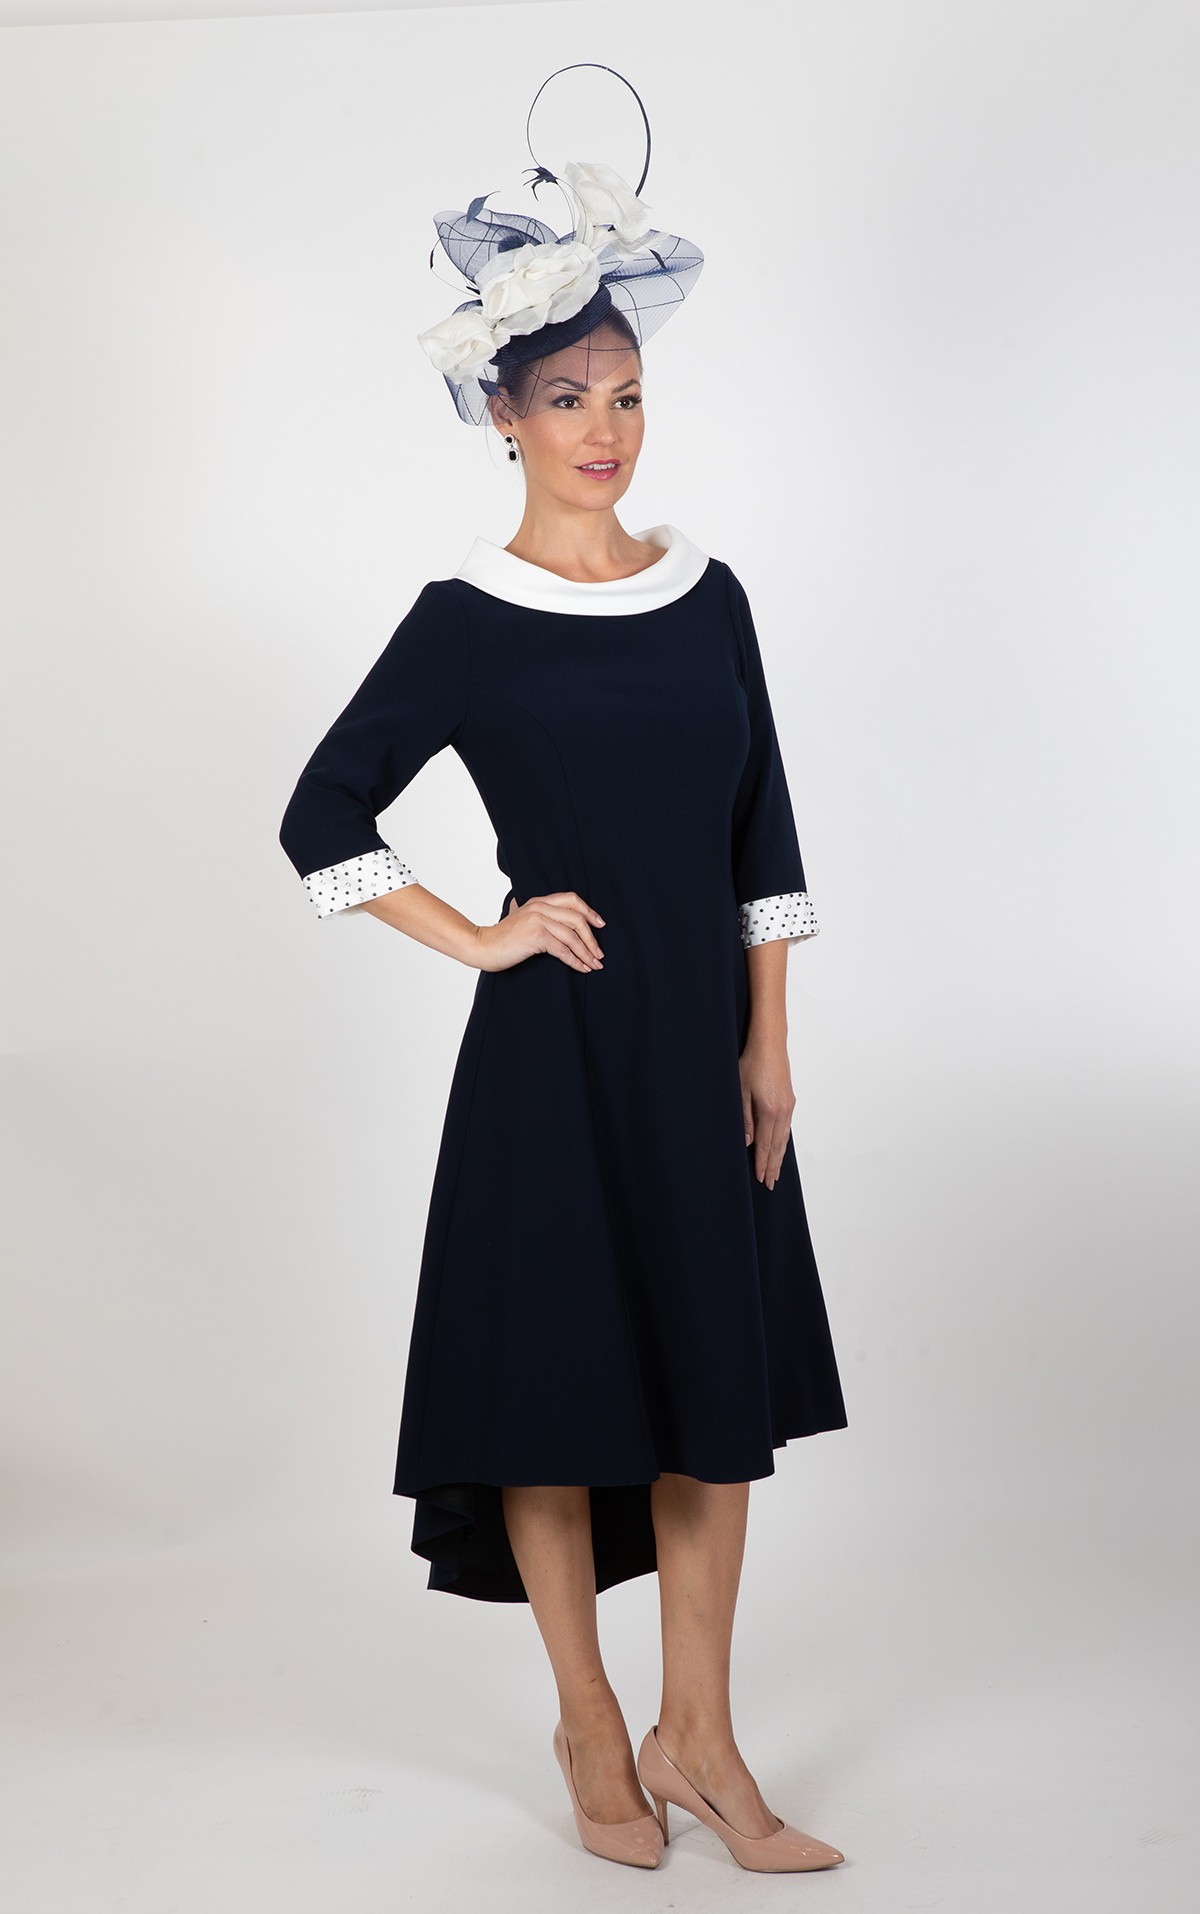 2403 - Size 22, 24 - Lizabella 2403, Navy and Ivory Aline Mother of the bride dress -  Blessings Occasion Dress shop - Loyal Parade, Mill Rise, Westdene, Brighton. East Sussex. BN1 5GG T: 01273 505766 E:info@blessingsbridal.co.uk